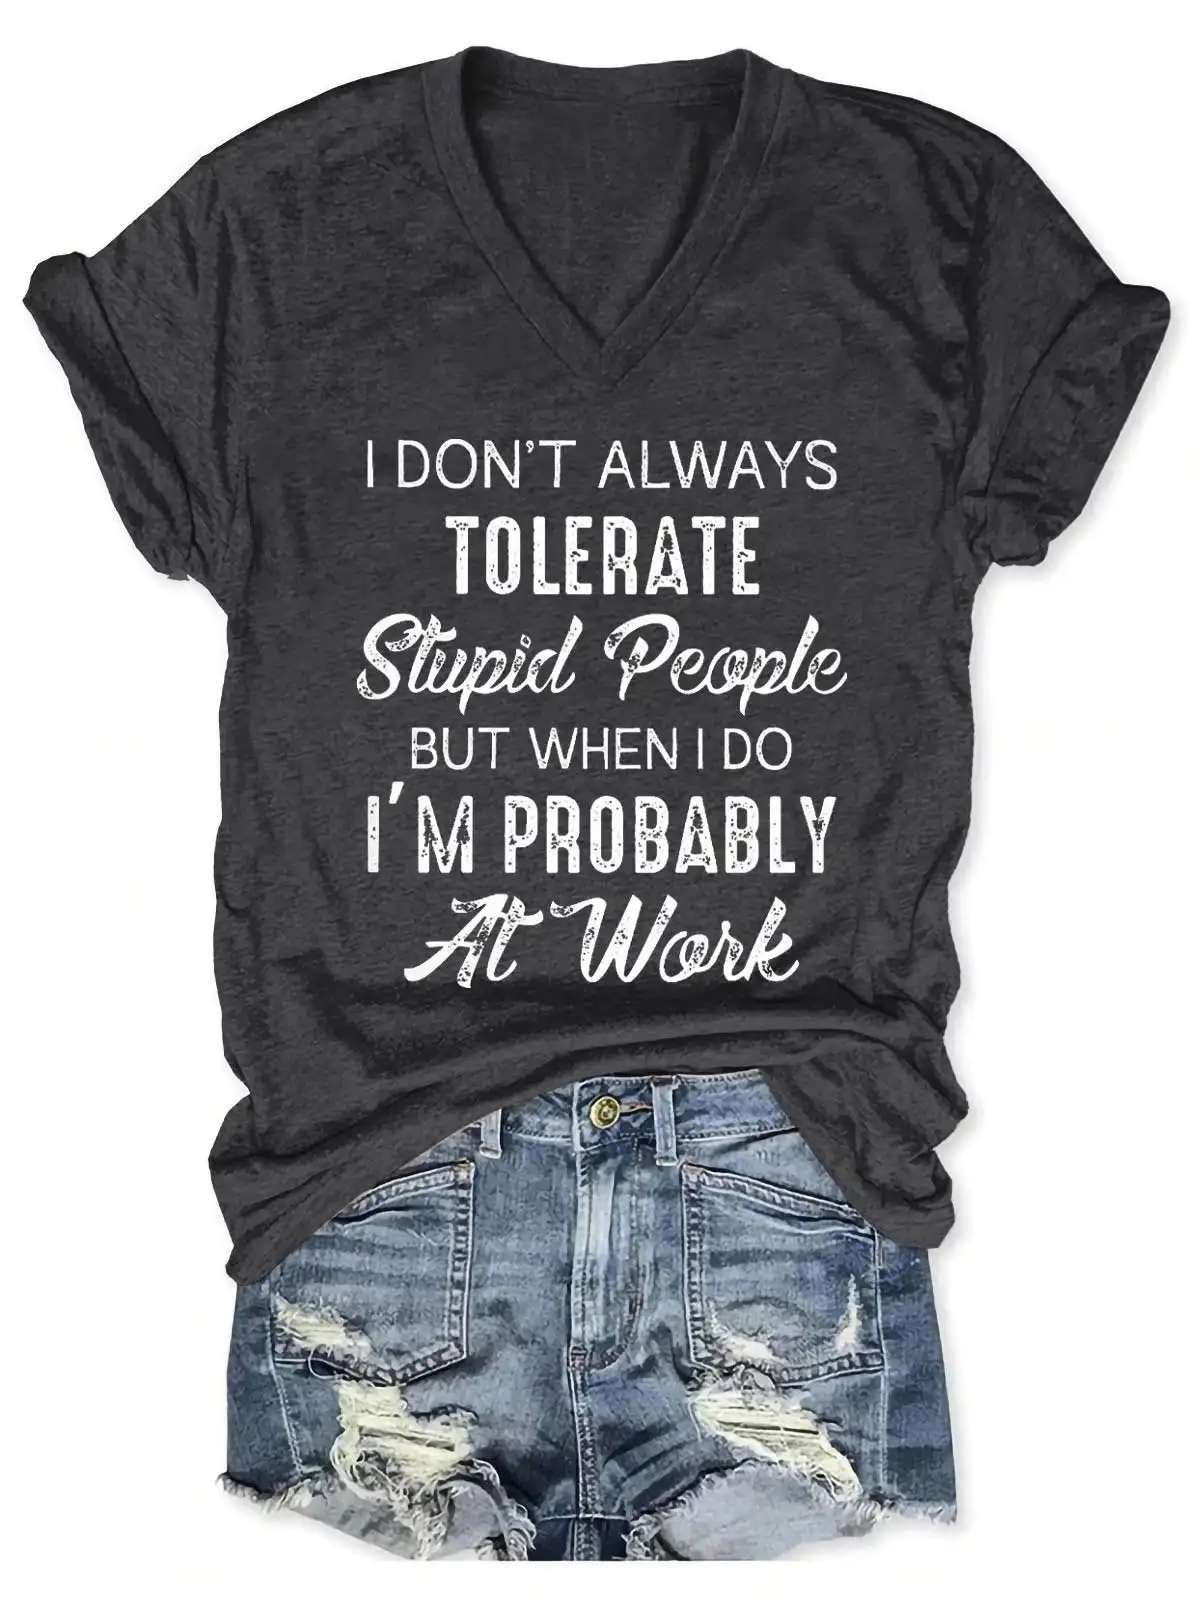 Lovessales I Don't Always Tolerate Stupid People But When I Do I'm Probably At Work V-Neck Short Sleeve 100% Cotton T-shirt